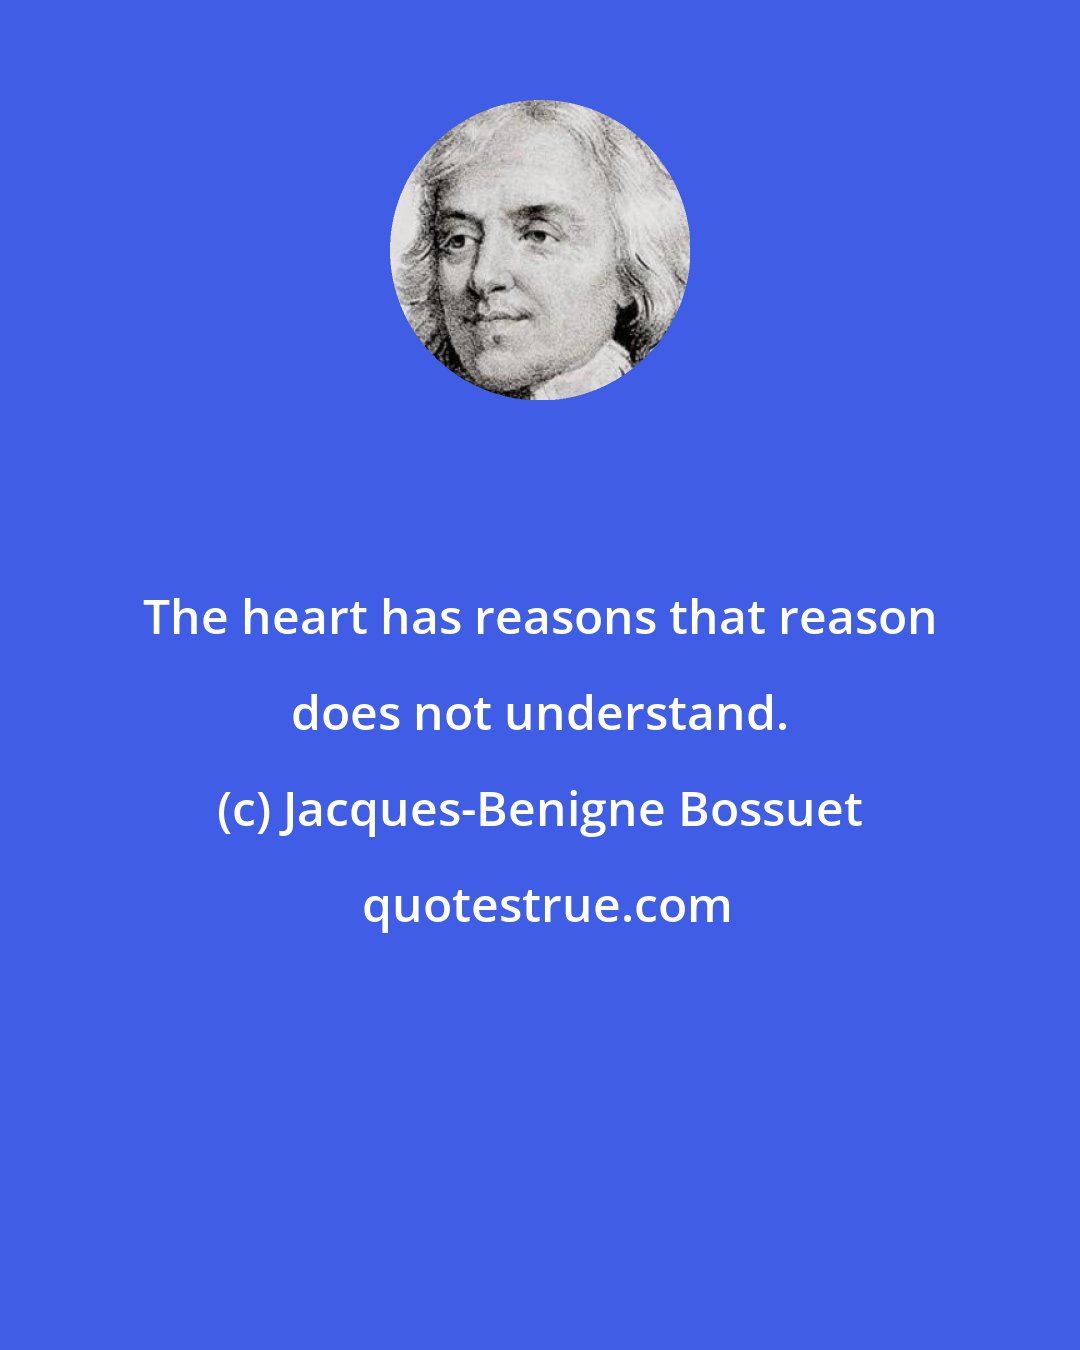 Jacques-Benigne Bossuet: The heart has reasons that reason does not understand.